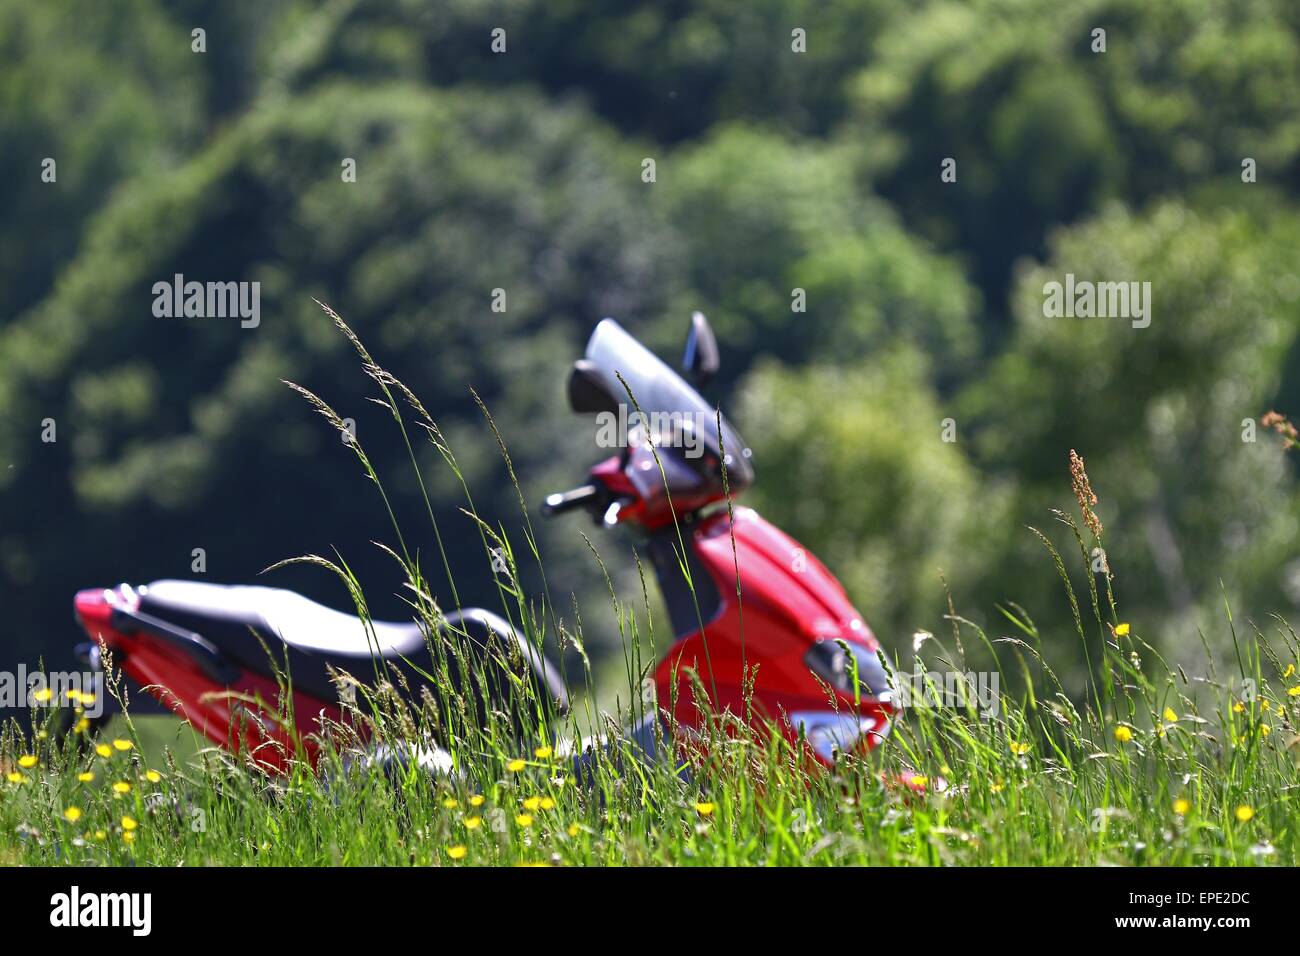 Wild grass with red scooter in the background Stock Photo